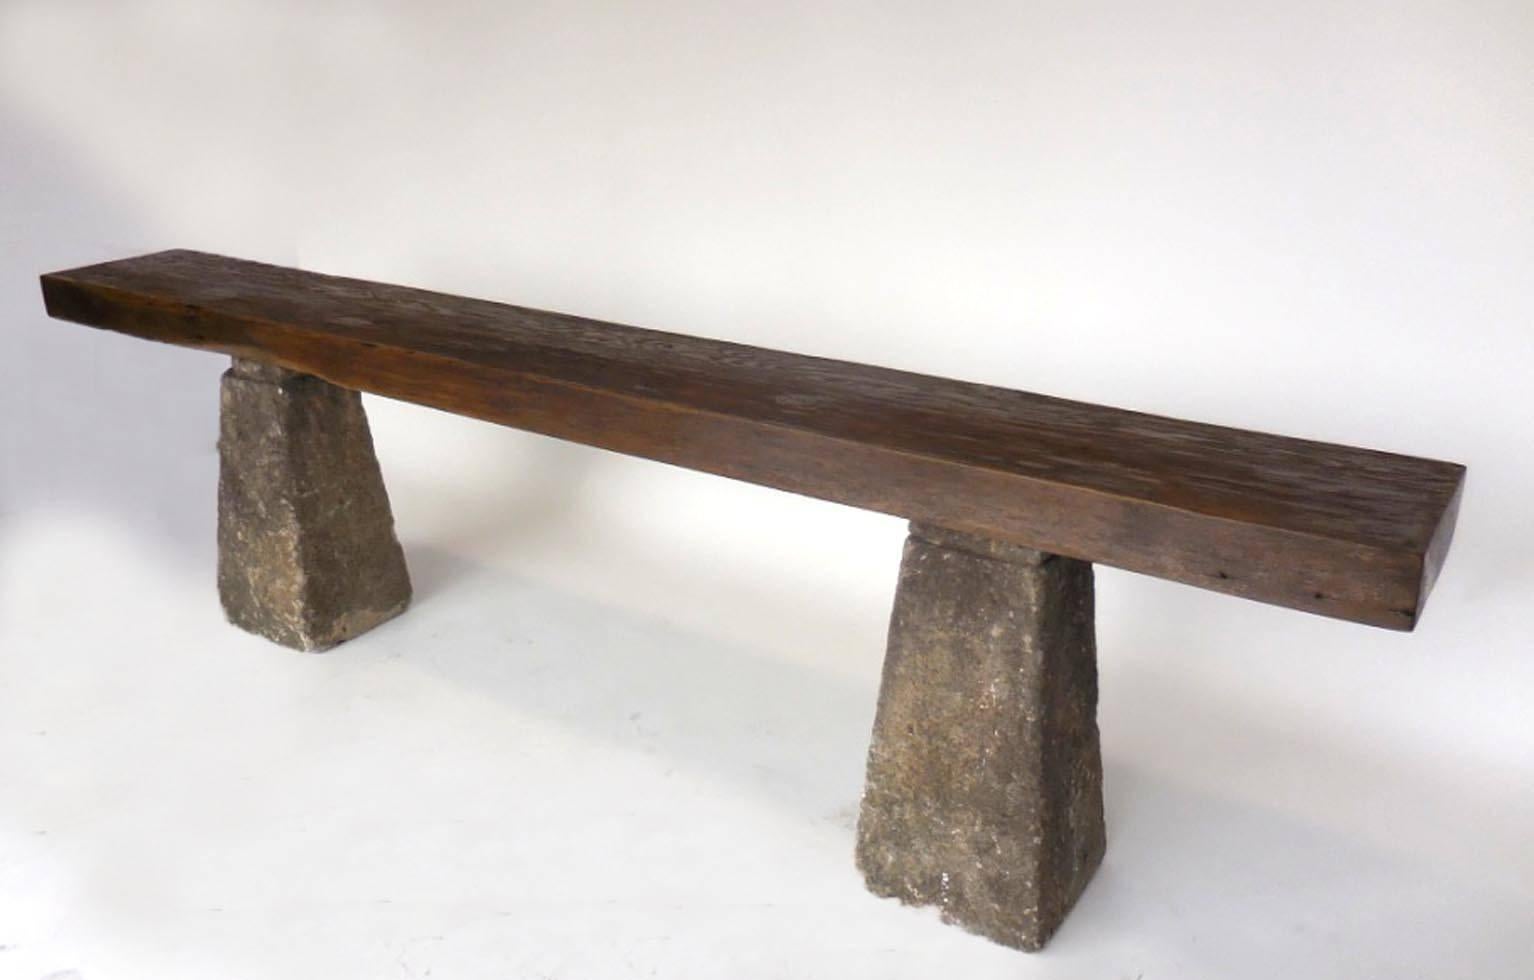 19th Century Primitive Modern Reclaimed Wood Console with Antique Stone Bases